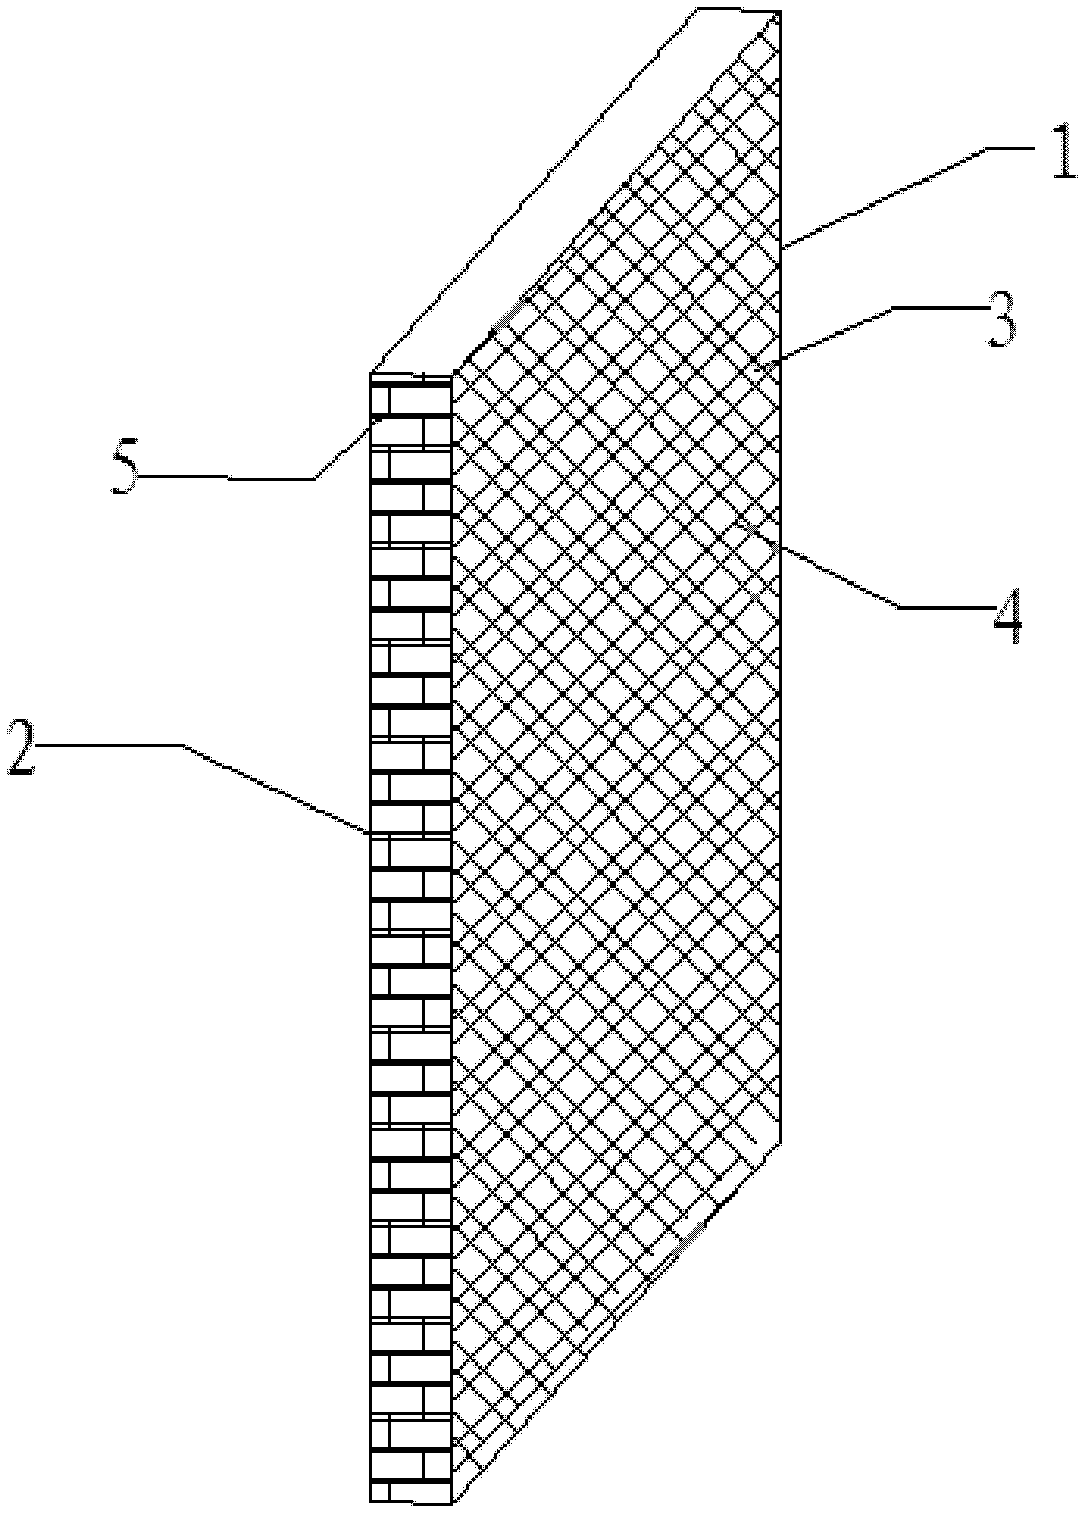 Double-face cloth capable of conducting moisture with single face